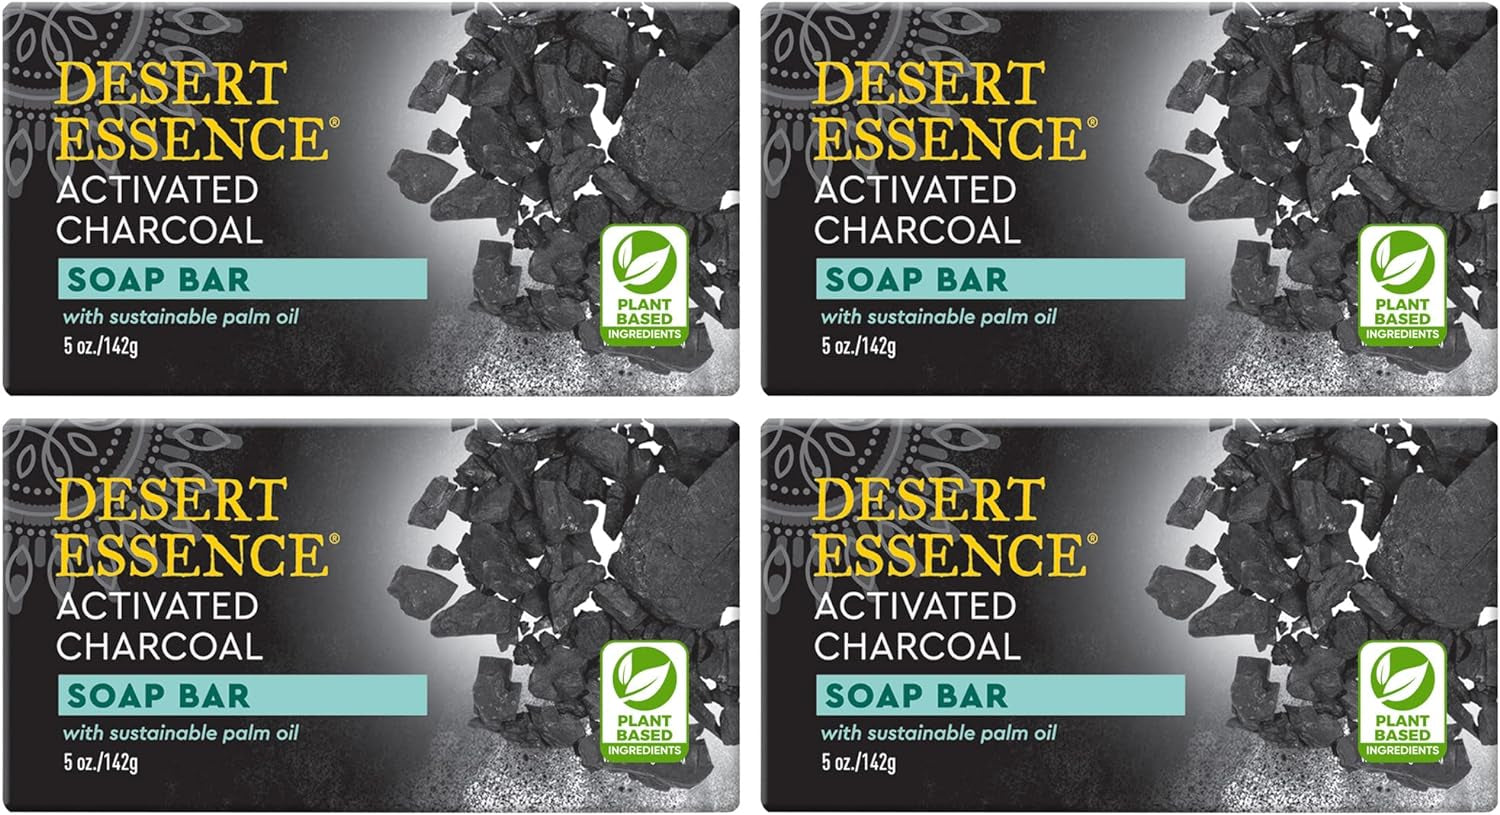 , Activated Charcoal Soap Bar 5 Oz (Pack of 4) Sustainable Palm Oil - Cucumber & Eco-Harvest Tea Tree Oil - Detoxifies, Cleanses & Removes Impurities